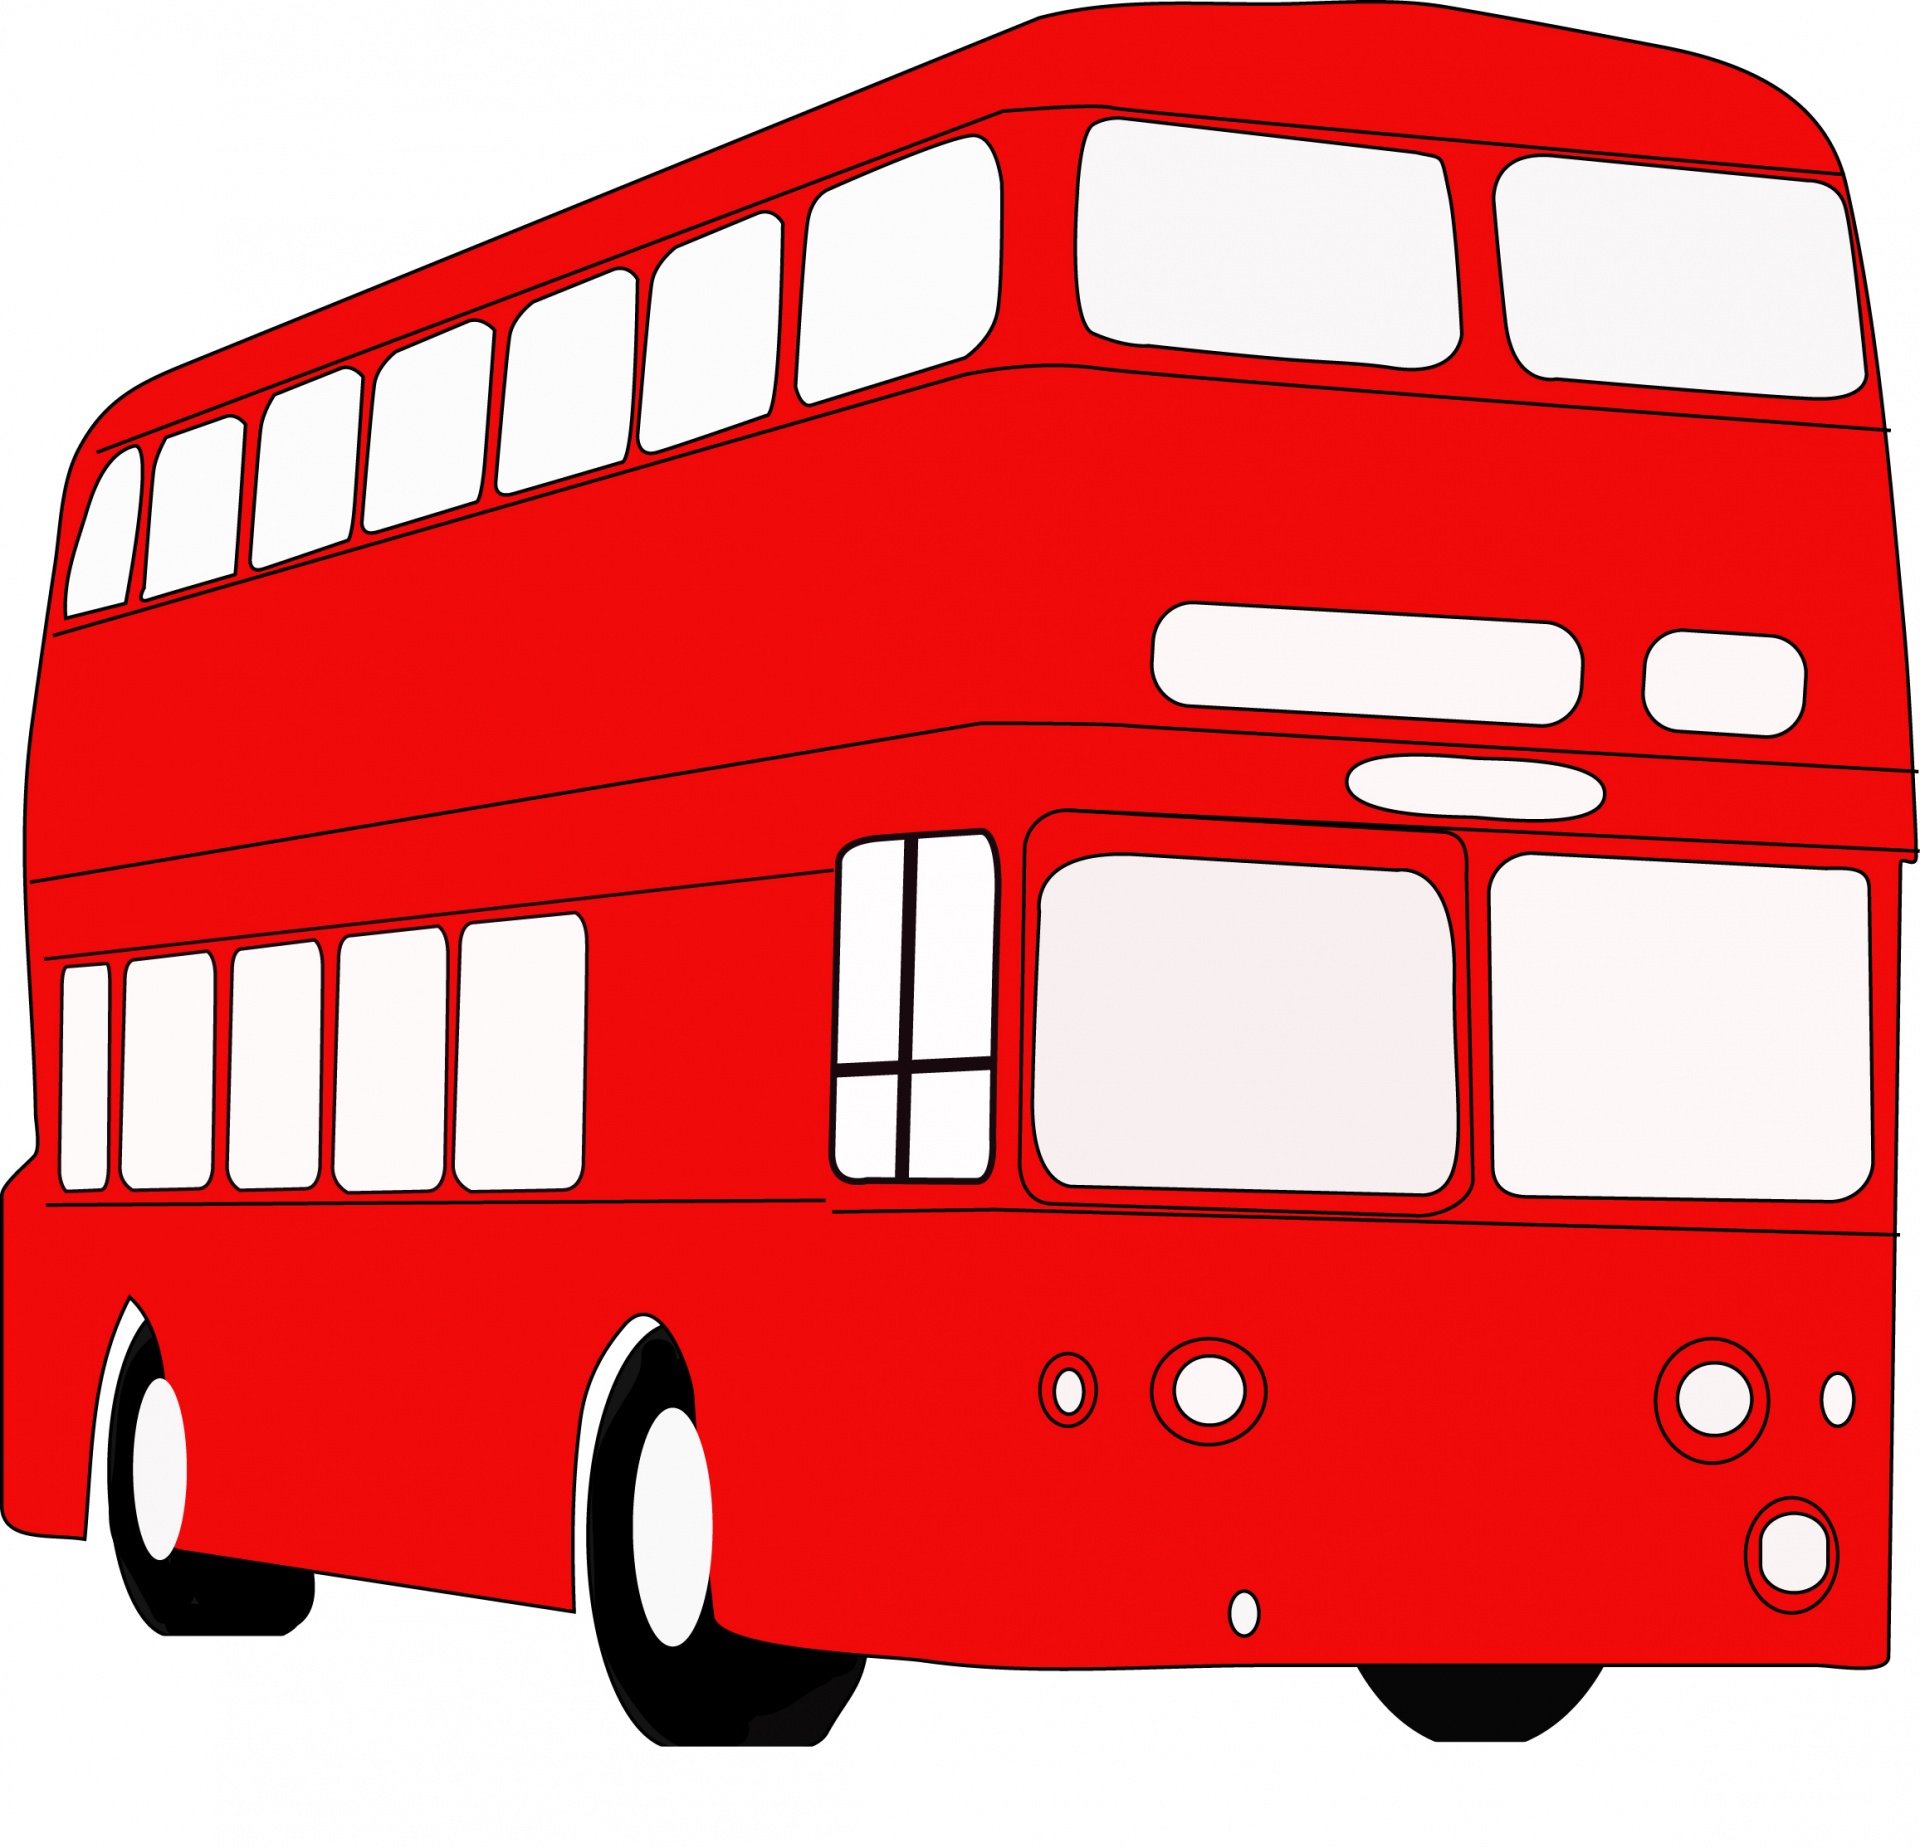 Bus,transport,clipart,red bus,red bus